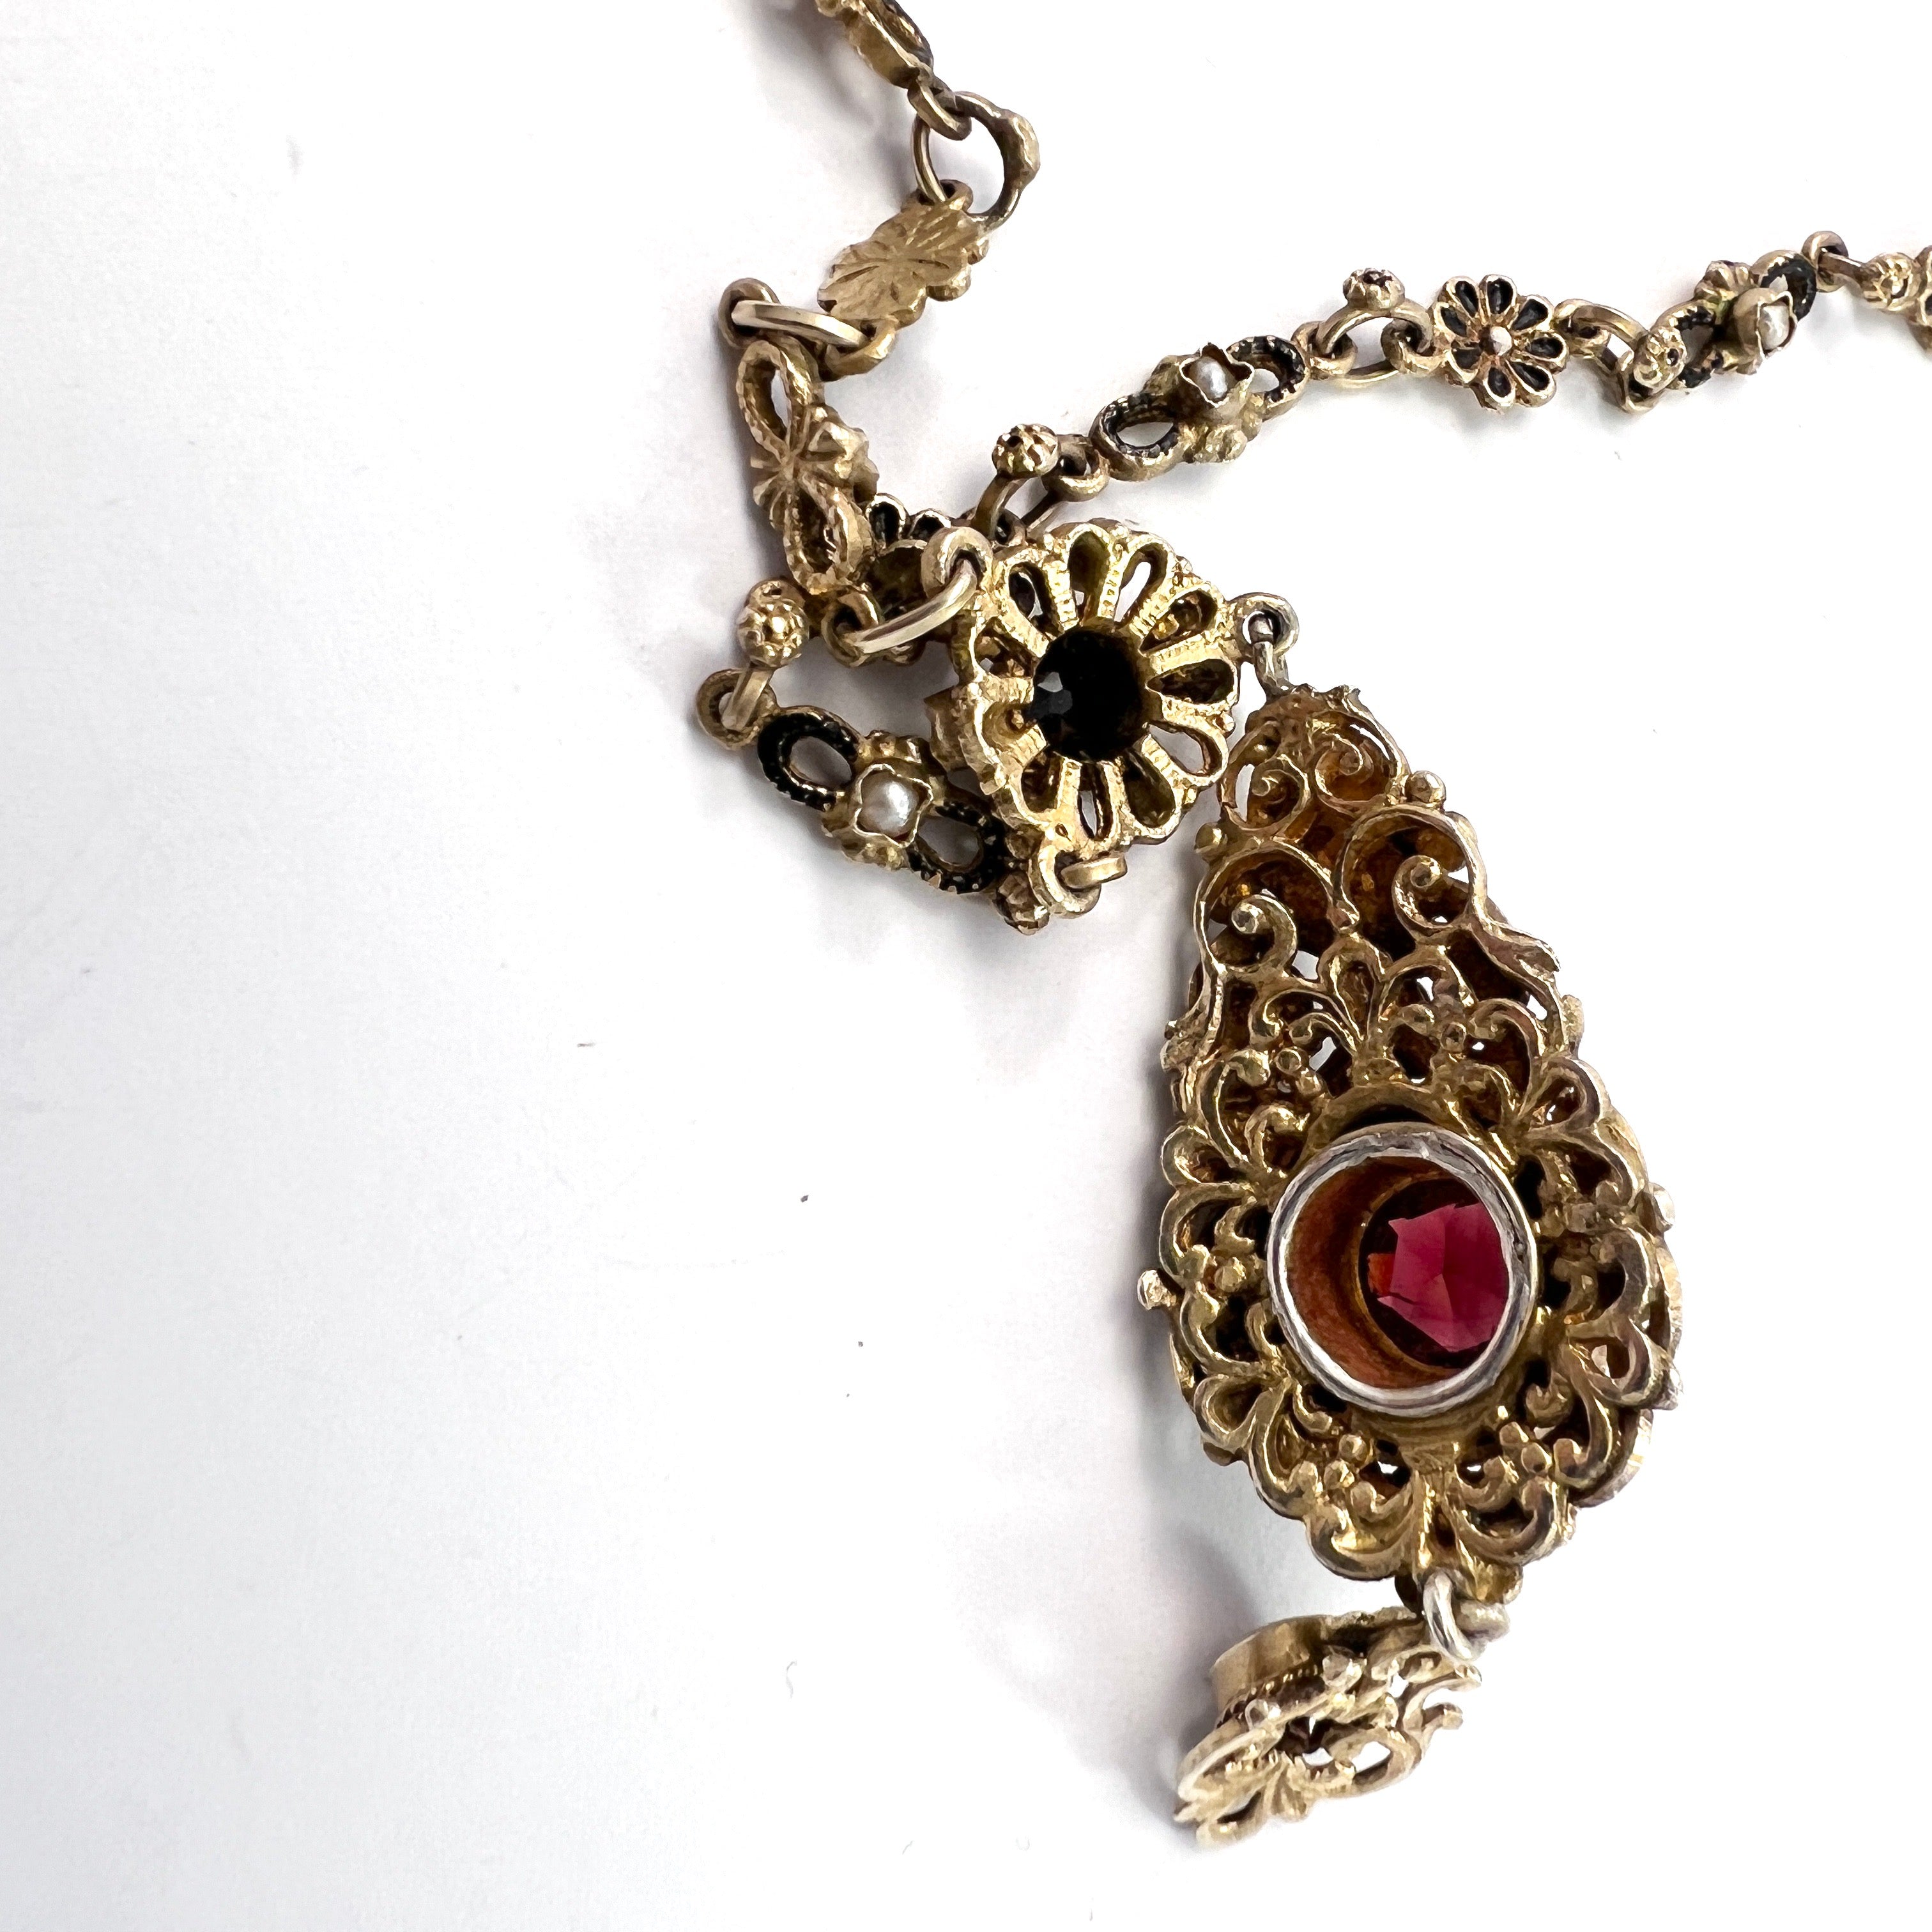 Austria-Hungary early 1900s. Antique Arts and Crafts Gilt 830 Silver Garnet Seed Pearl Enamel Necklace